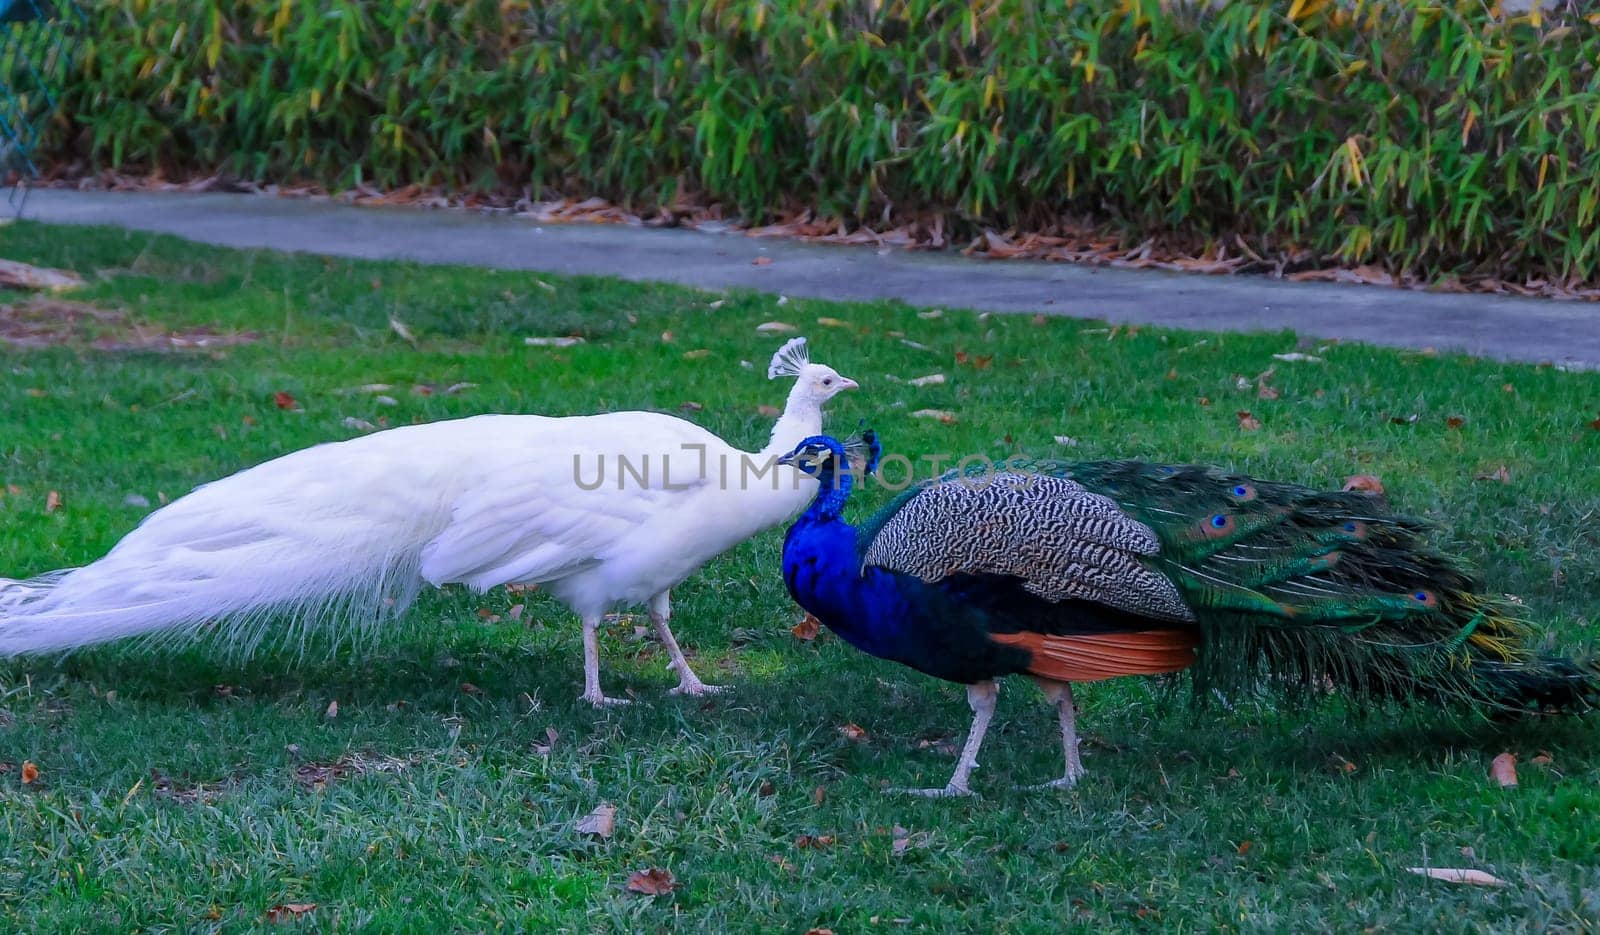 A tame albino peacock and a normal peacock stroll through the grass in a park by Hydrobiolog